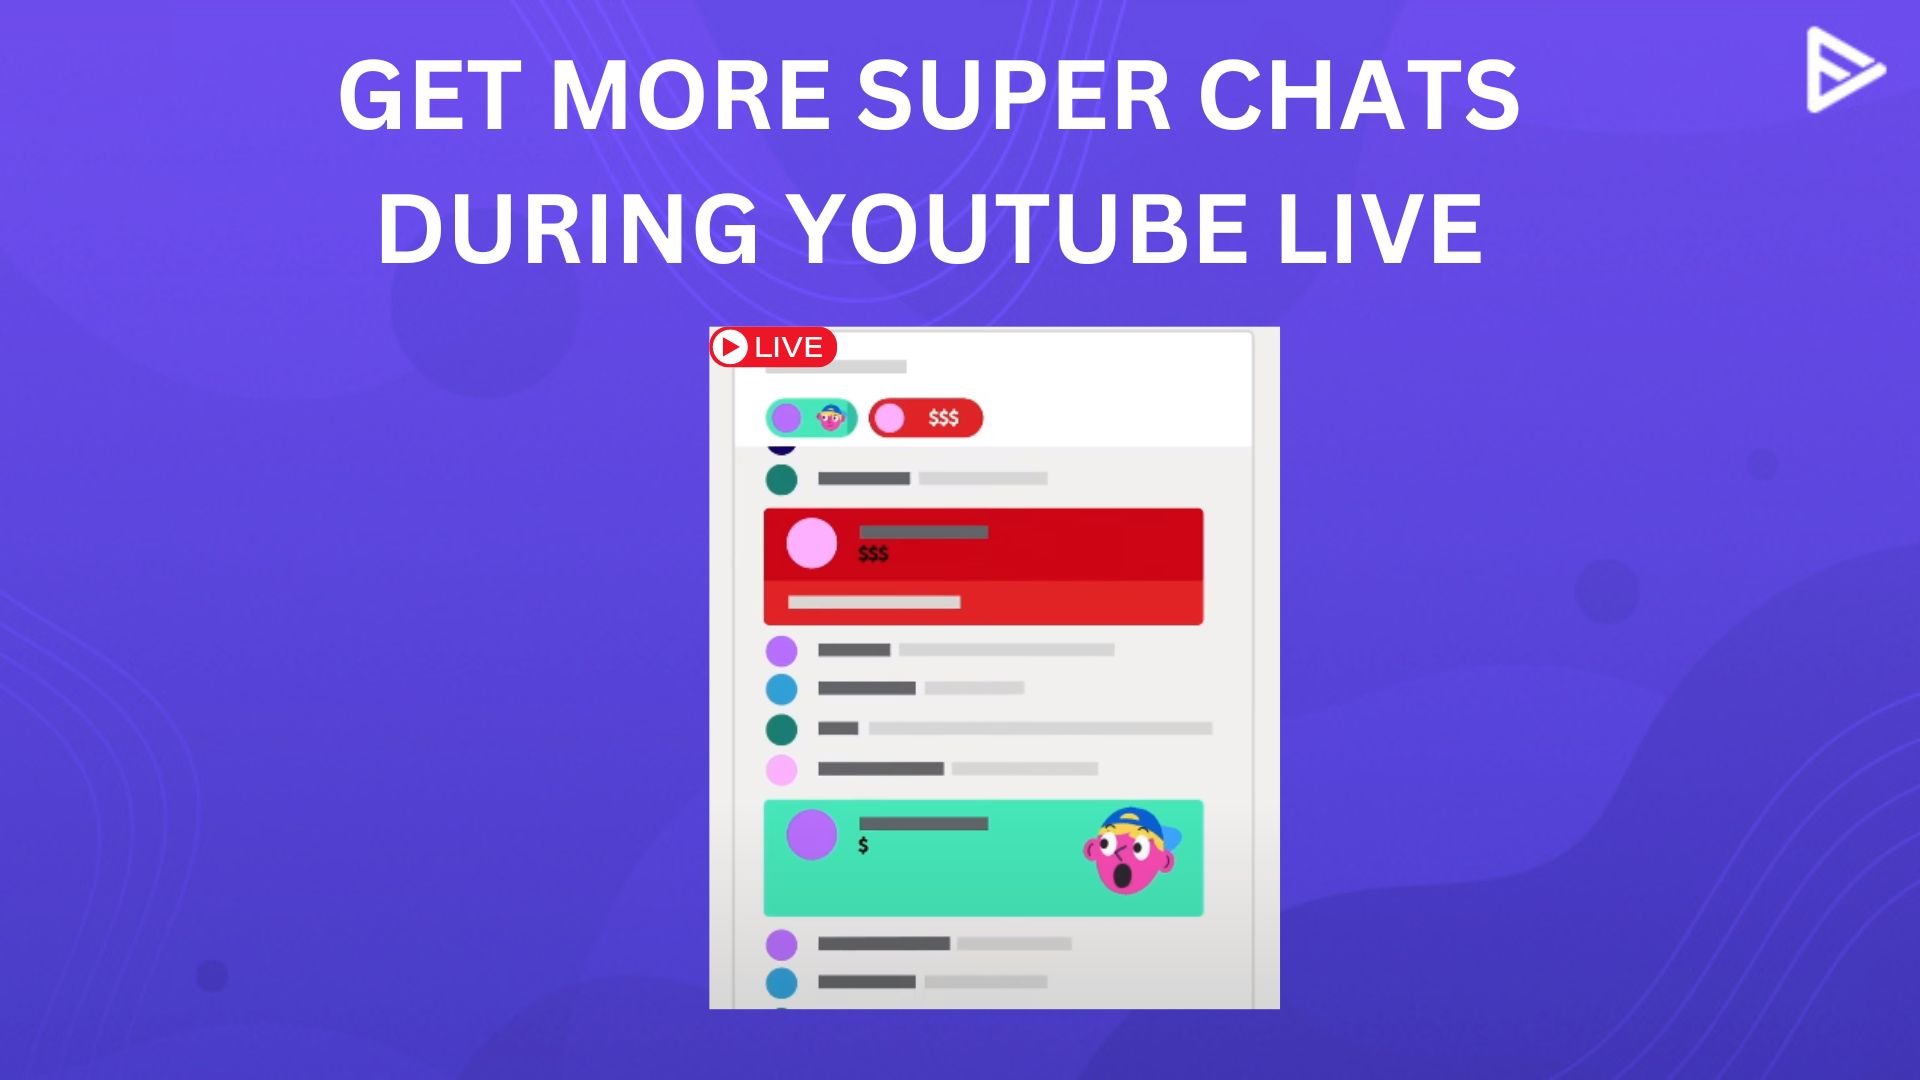 HOW TO GET SUPER CHATS ON YOUTUBE